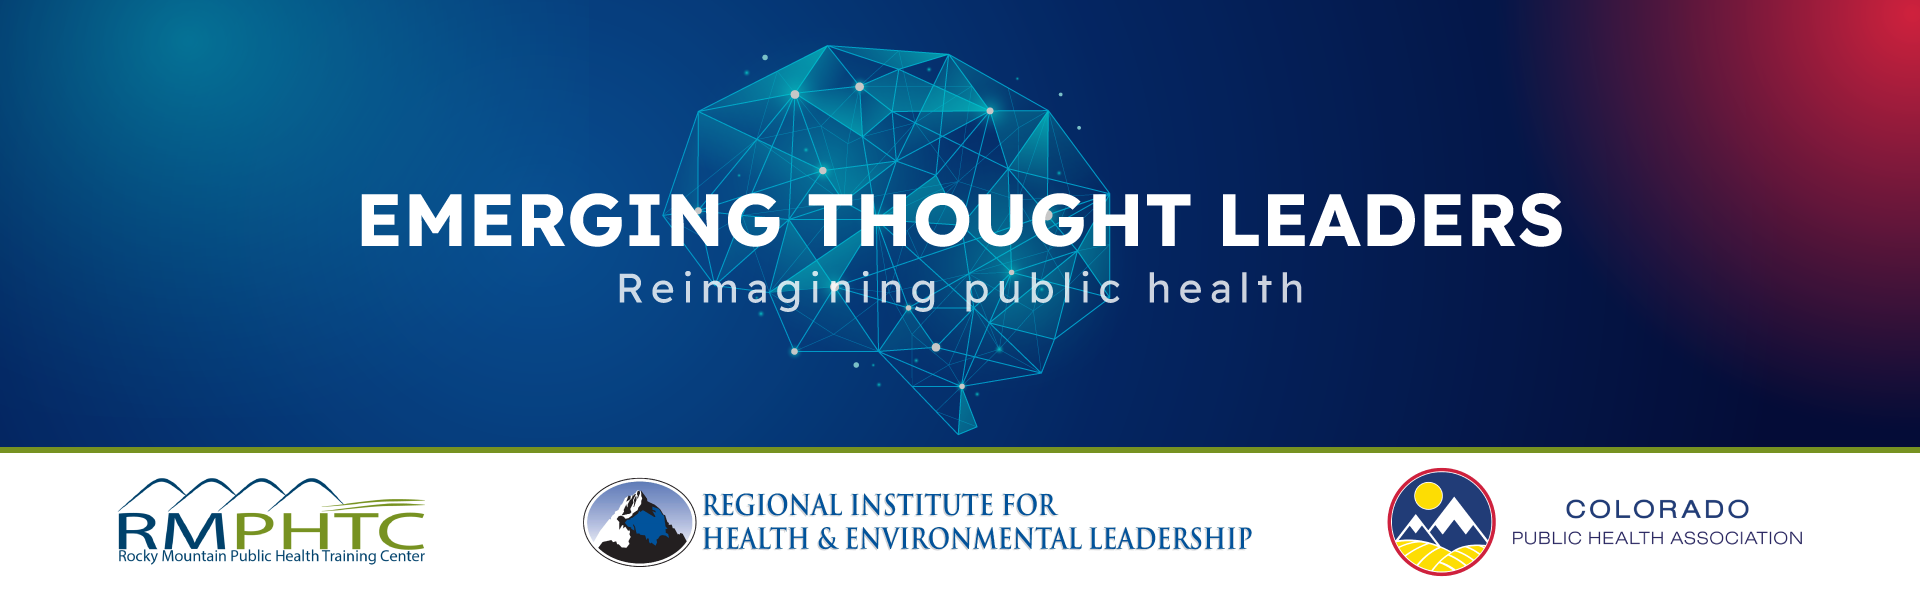 Emerging Thought Leaders logo